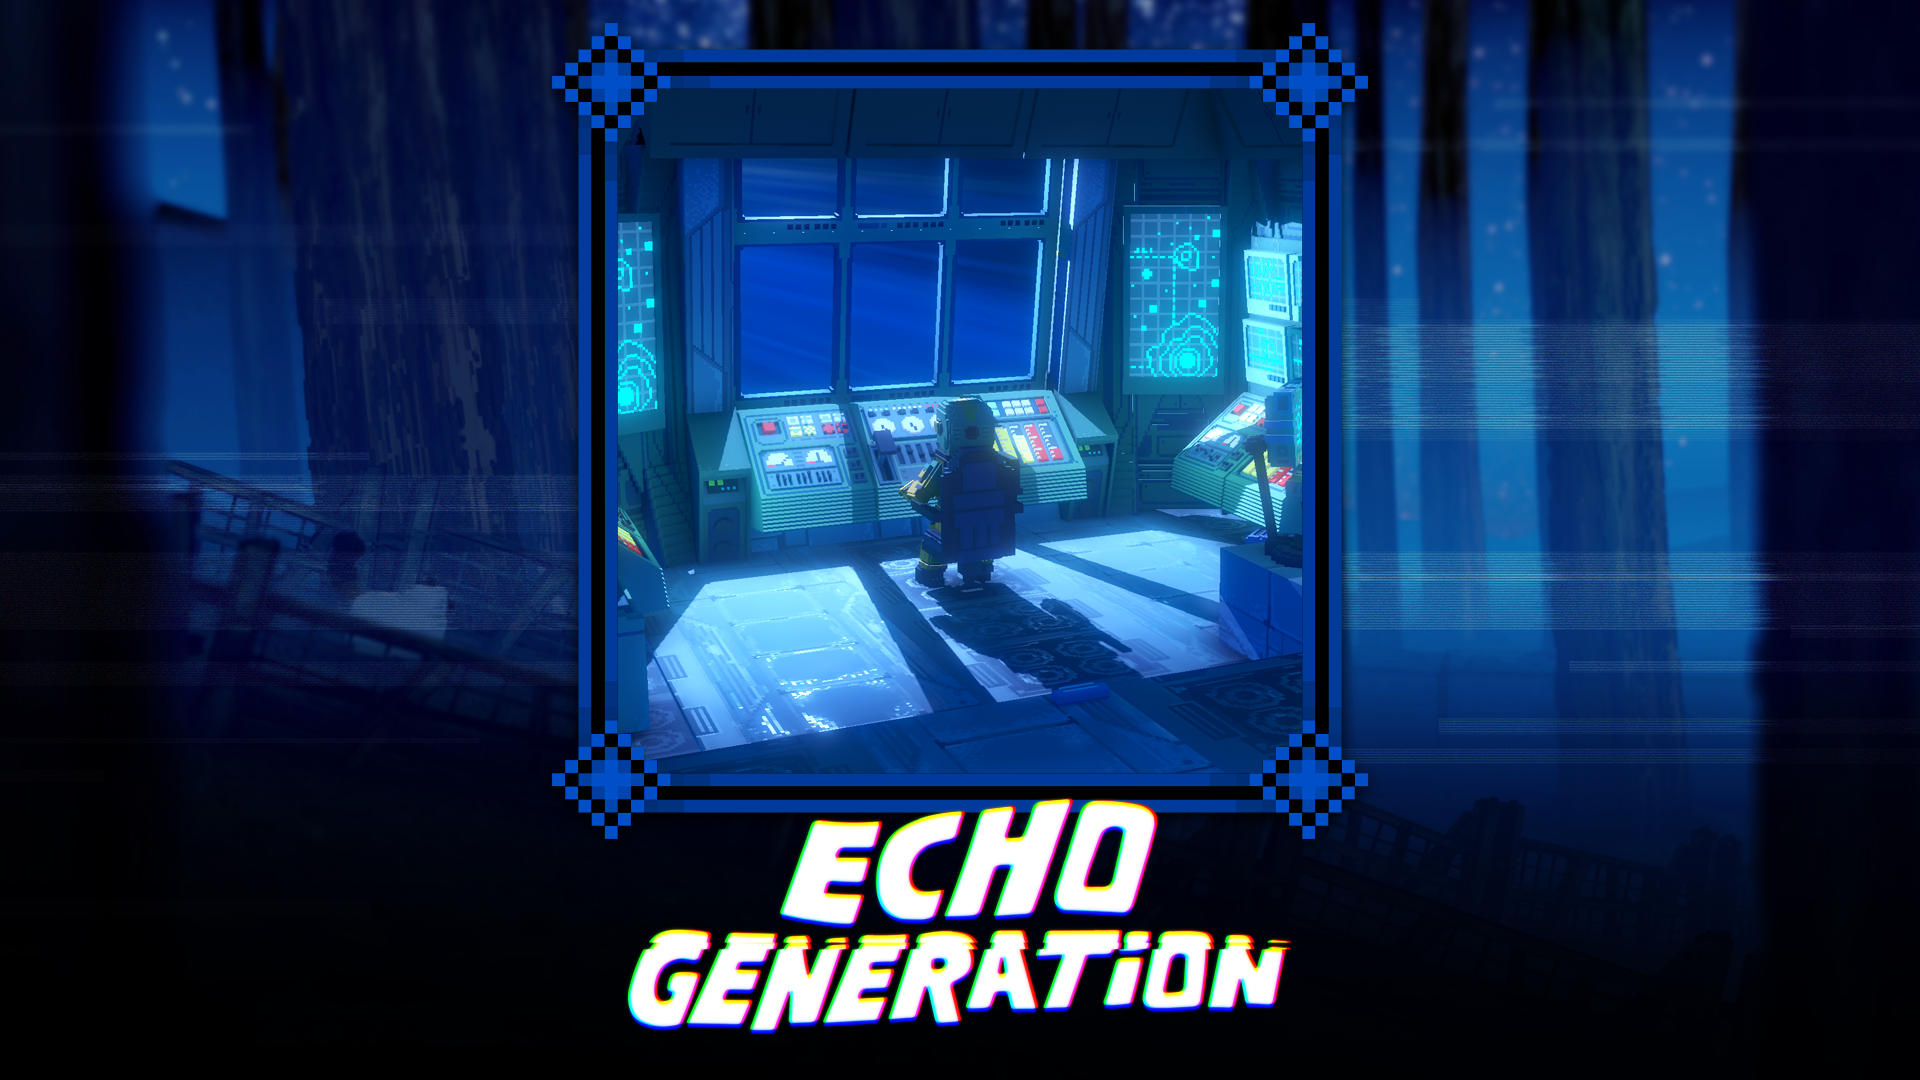 Icon for Echo Generation